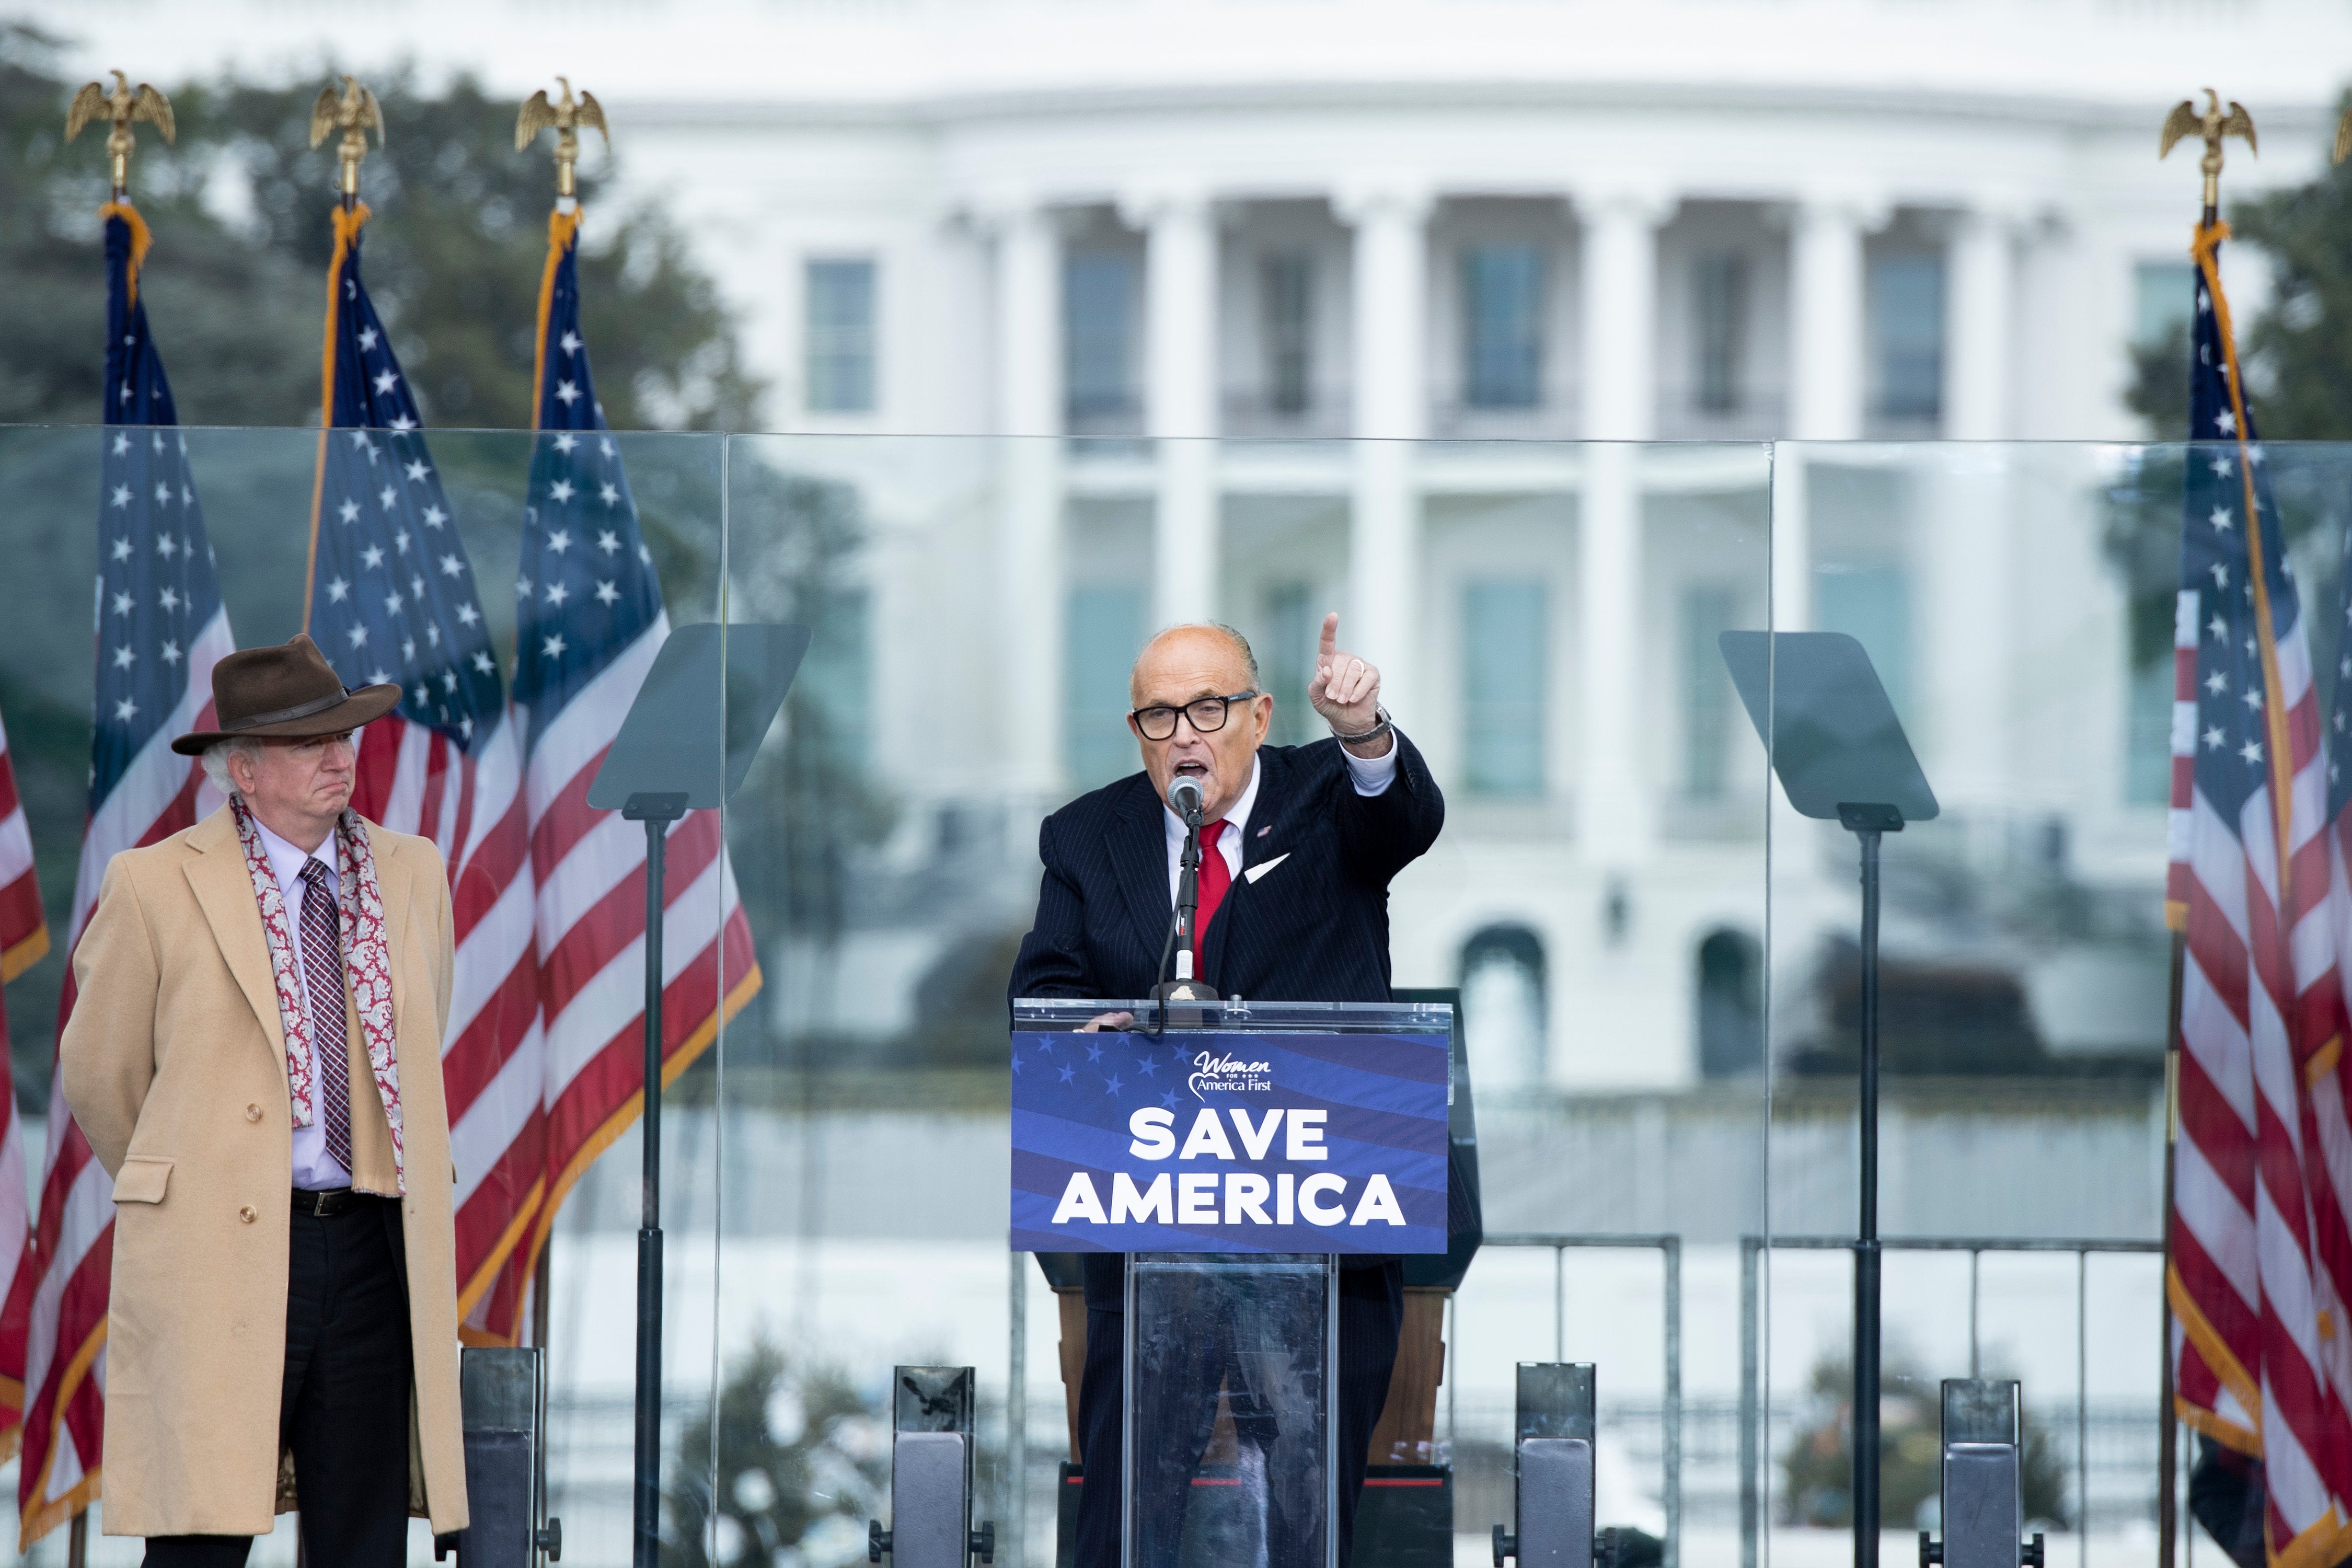 Rudy Giuliani called on thousands of Donald Trump supporters on 6 January to settle the dispute over the election via “trial by combat” during rally